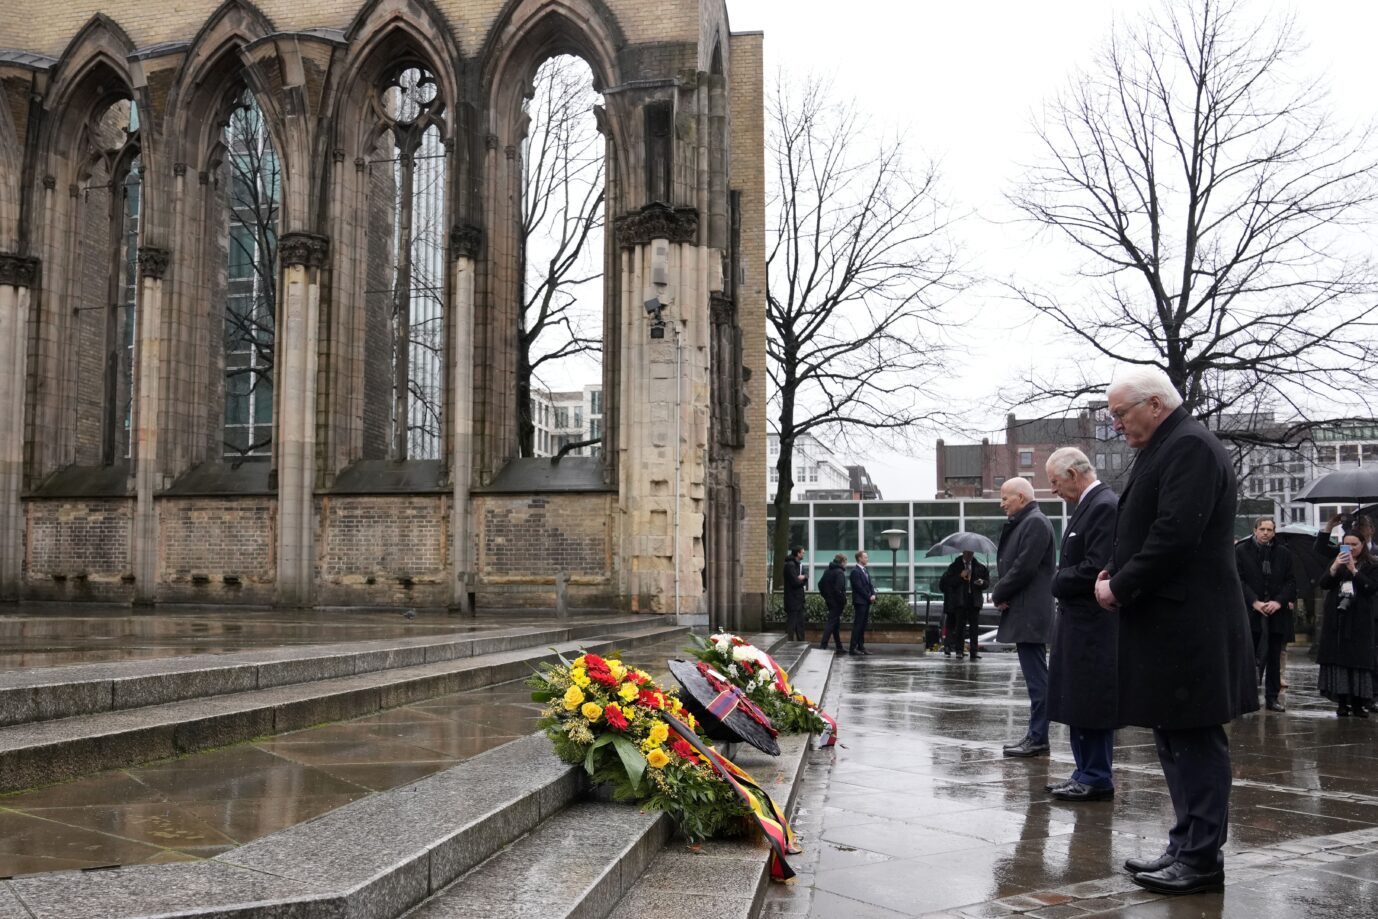 Britain's King Charles III, center, and German President Frank-Walter Steinmeier, right, lay a wreath of flowers at St. Nikolai Memorial in Hamburg, Germany, Friday, March 31, 2023. King Charles III arrived Wednesday for a three-day official visit to Germany. (AP Photo/Matthias Schrader)